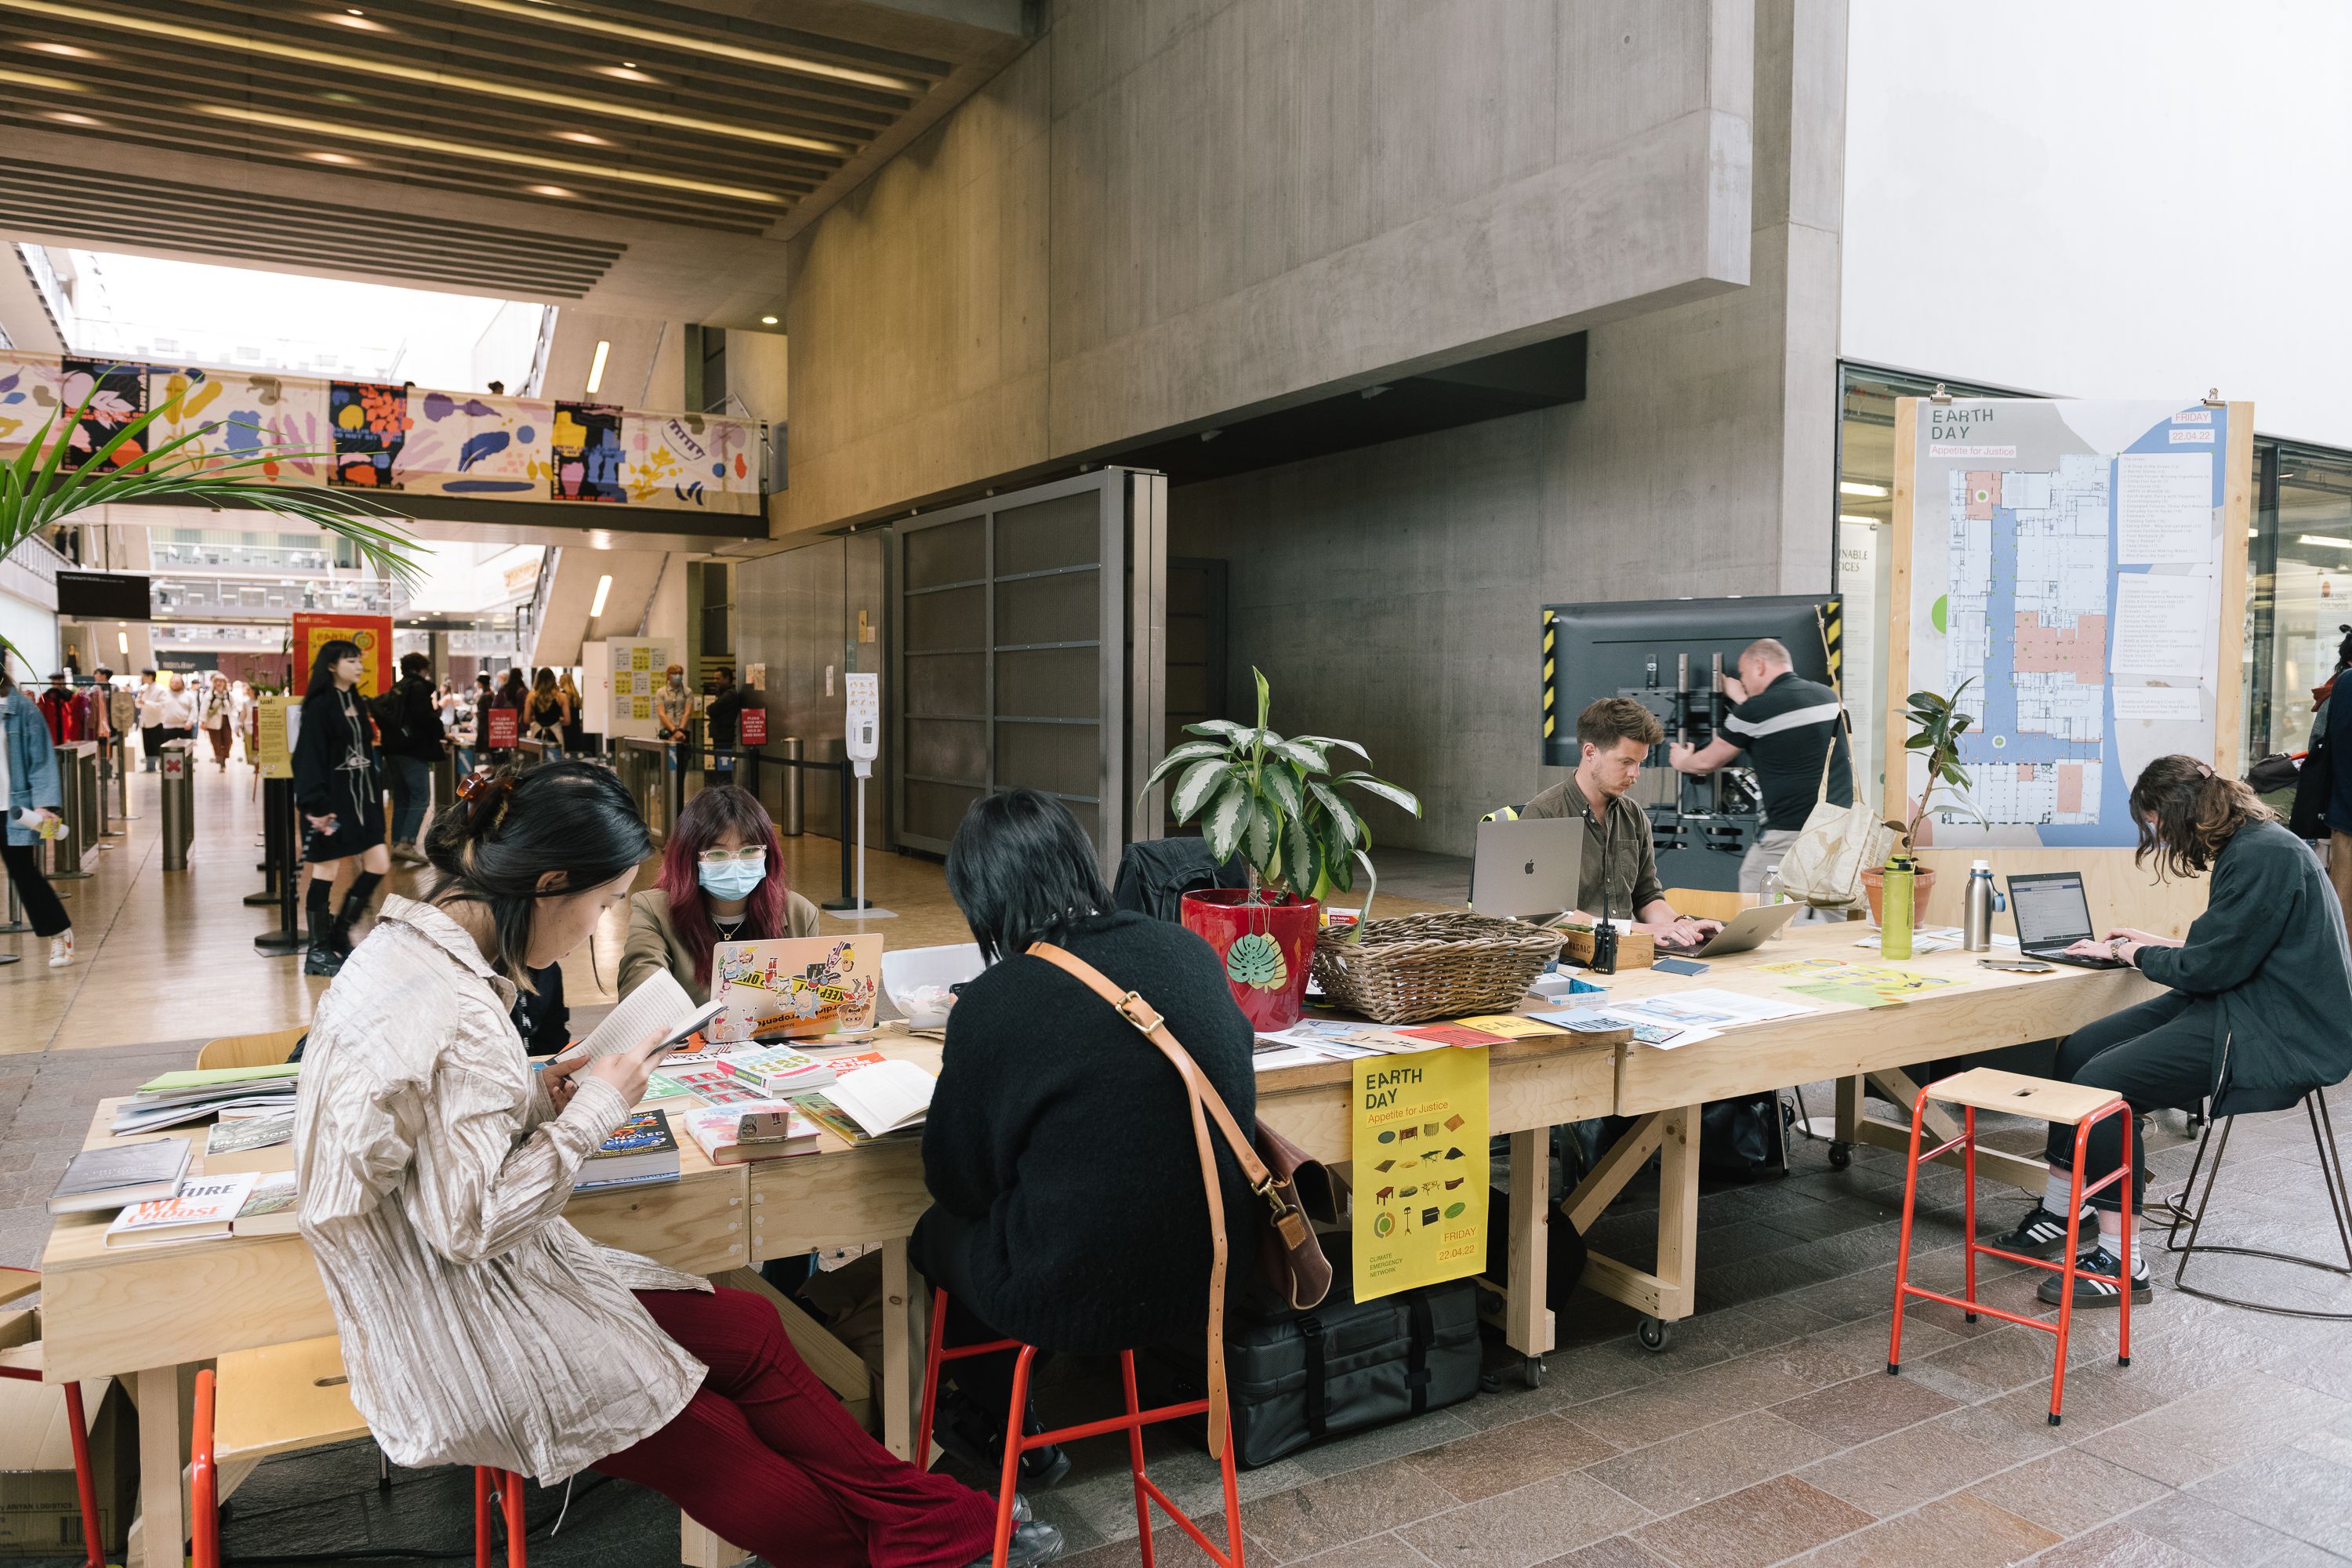 A group of people working at a table at CSM. They are making and doing and plants and banners are visible.